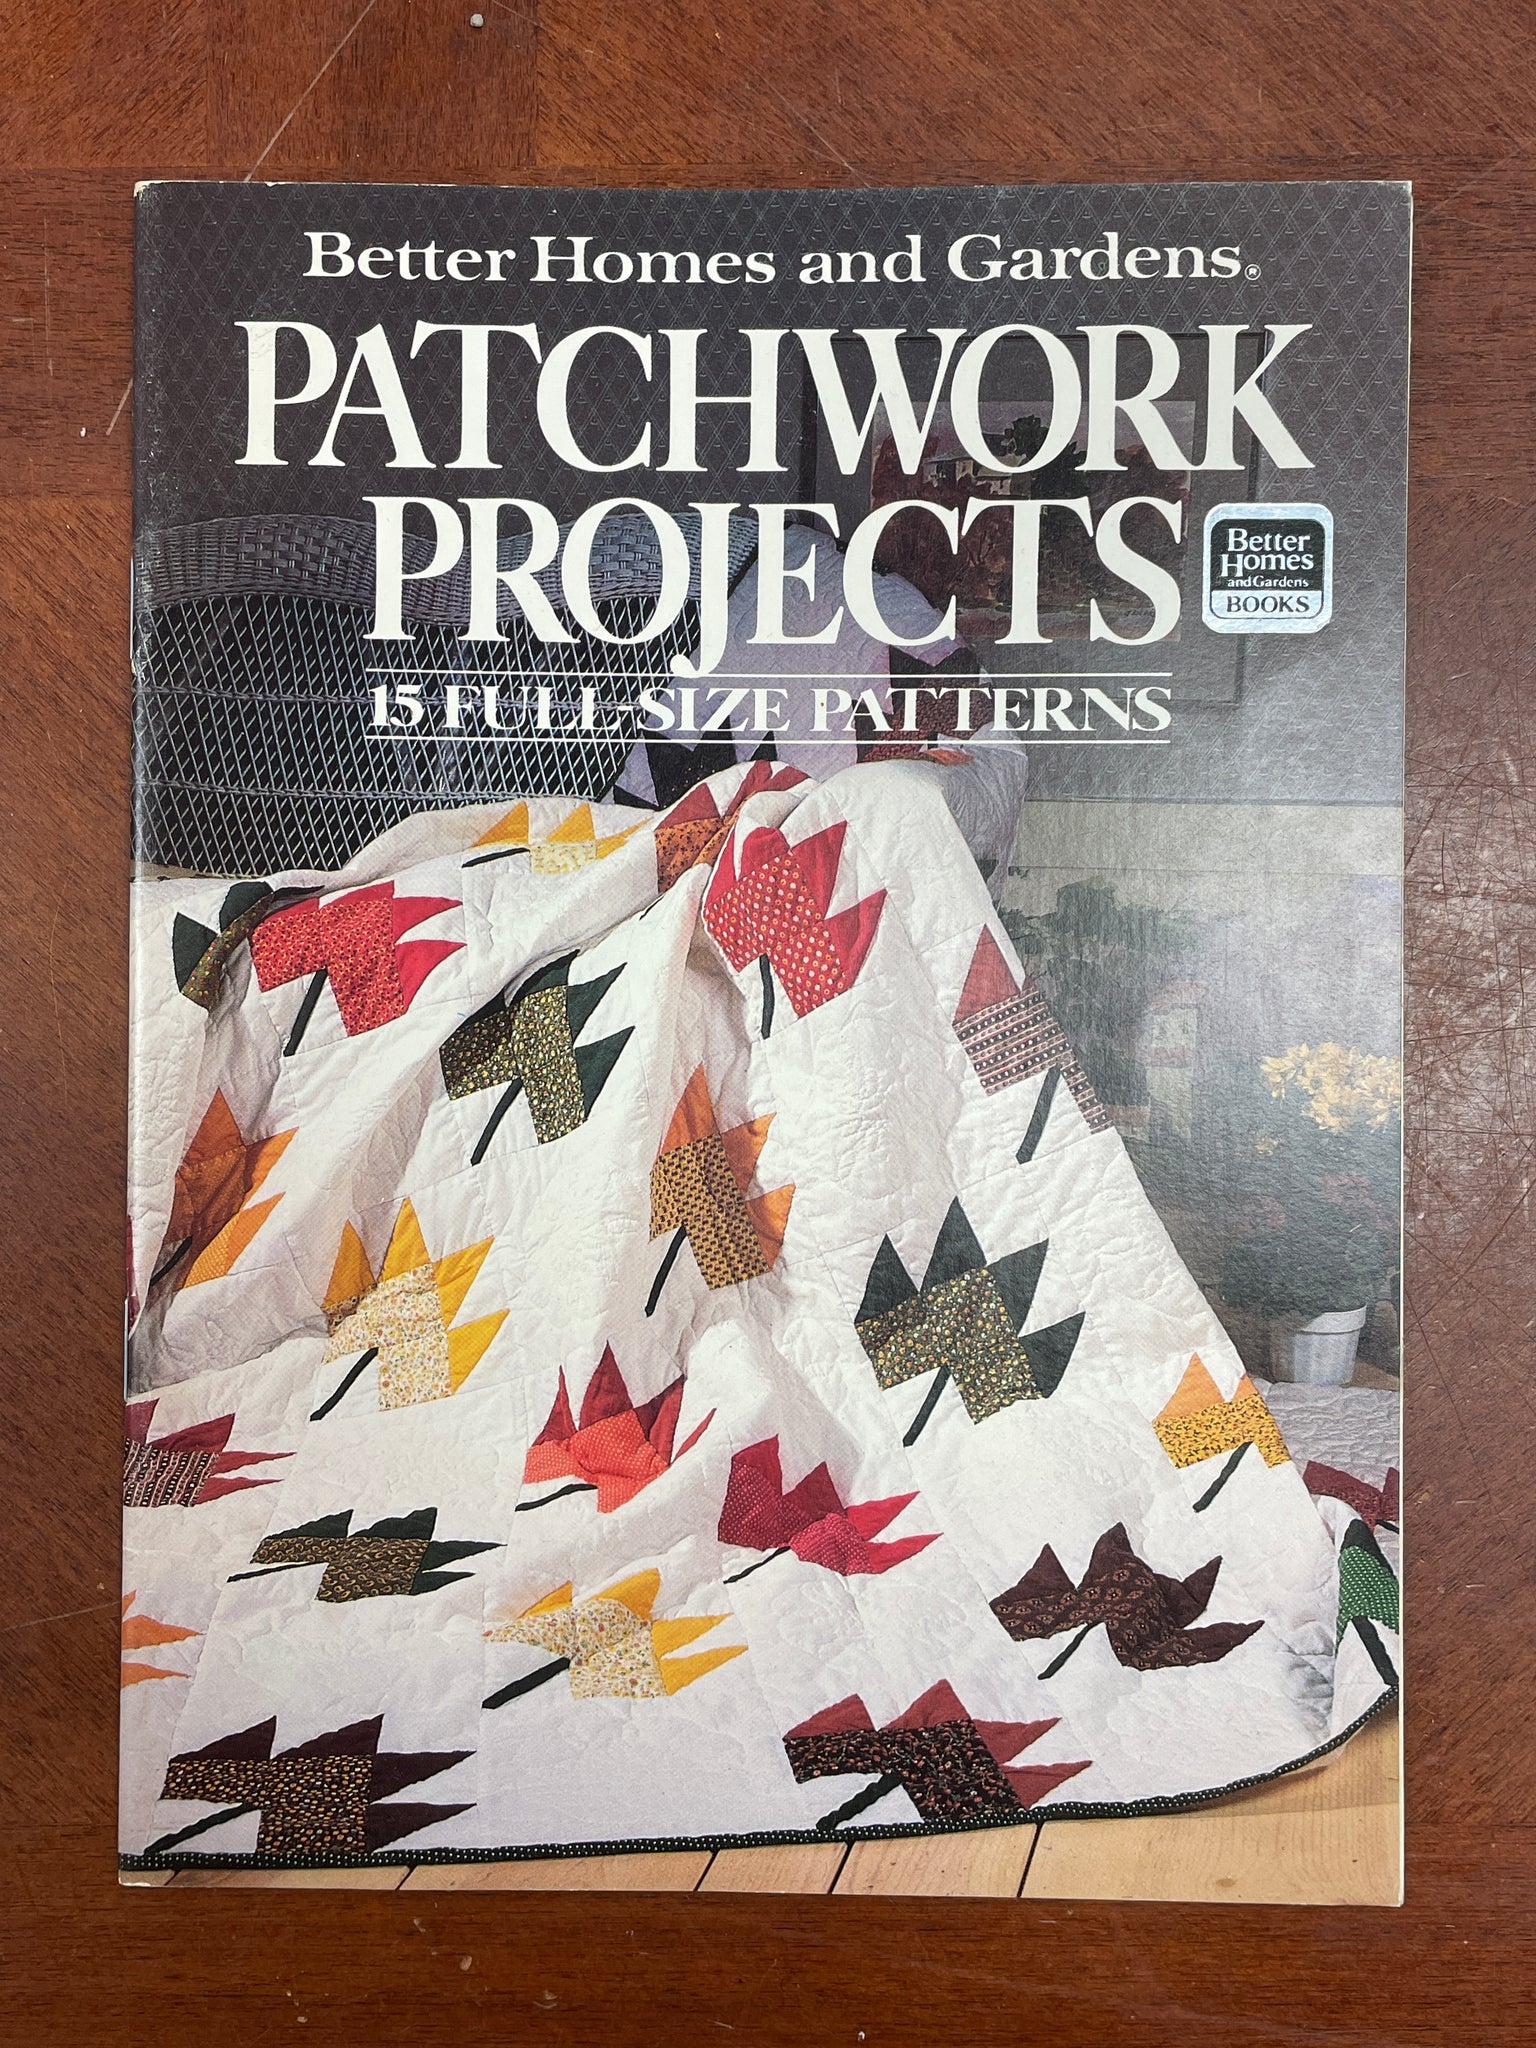 1985 Quiltinig Book - "Patchwork Projects"